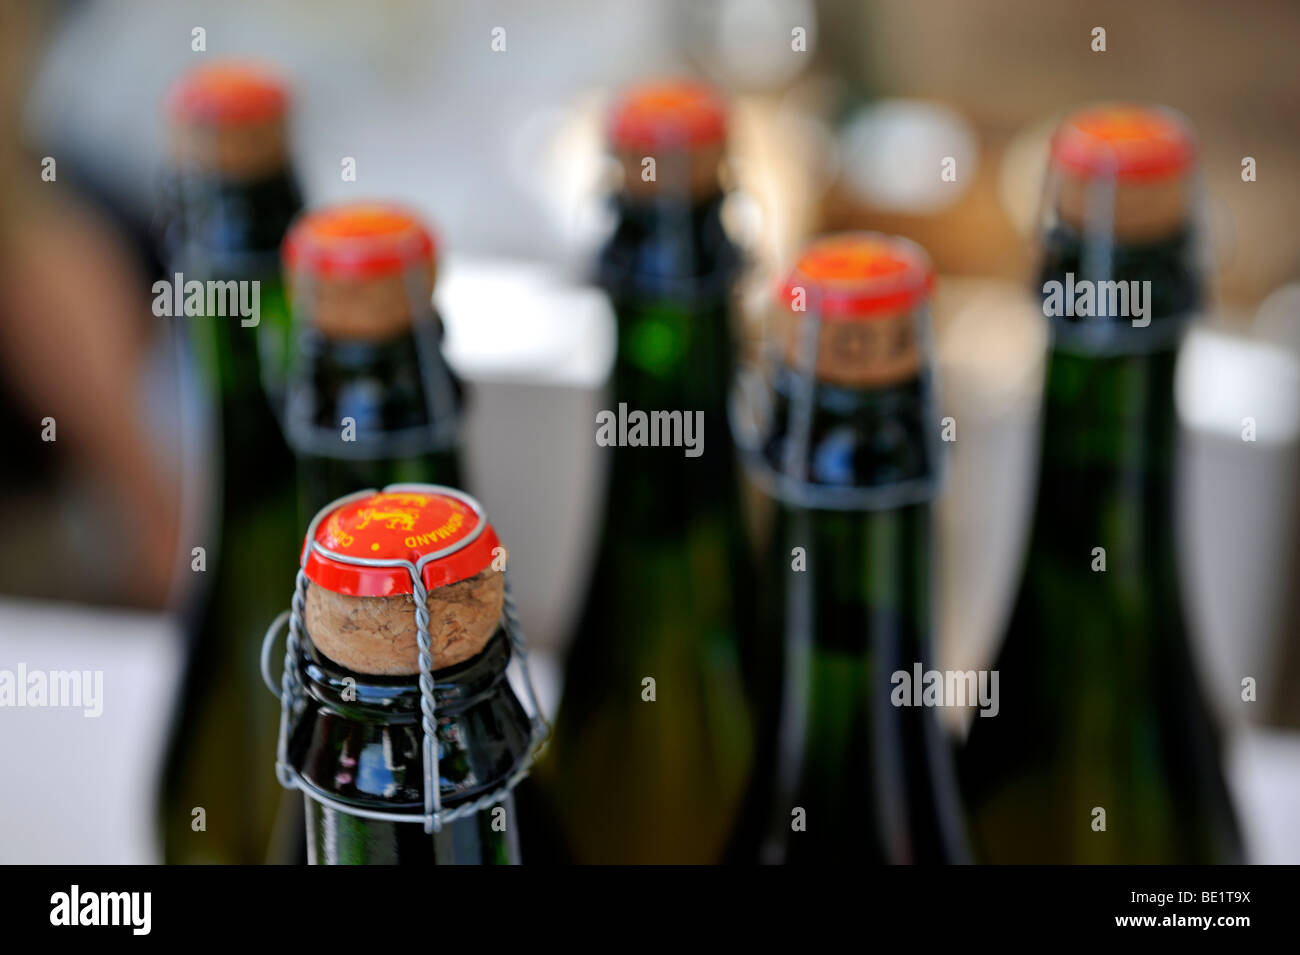 Wired, corked sparkling drinks bottle tops Stock Photo